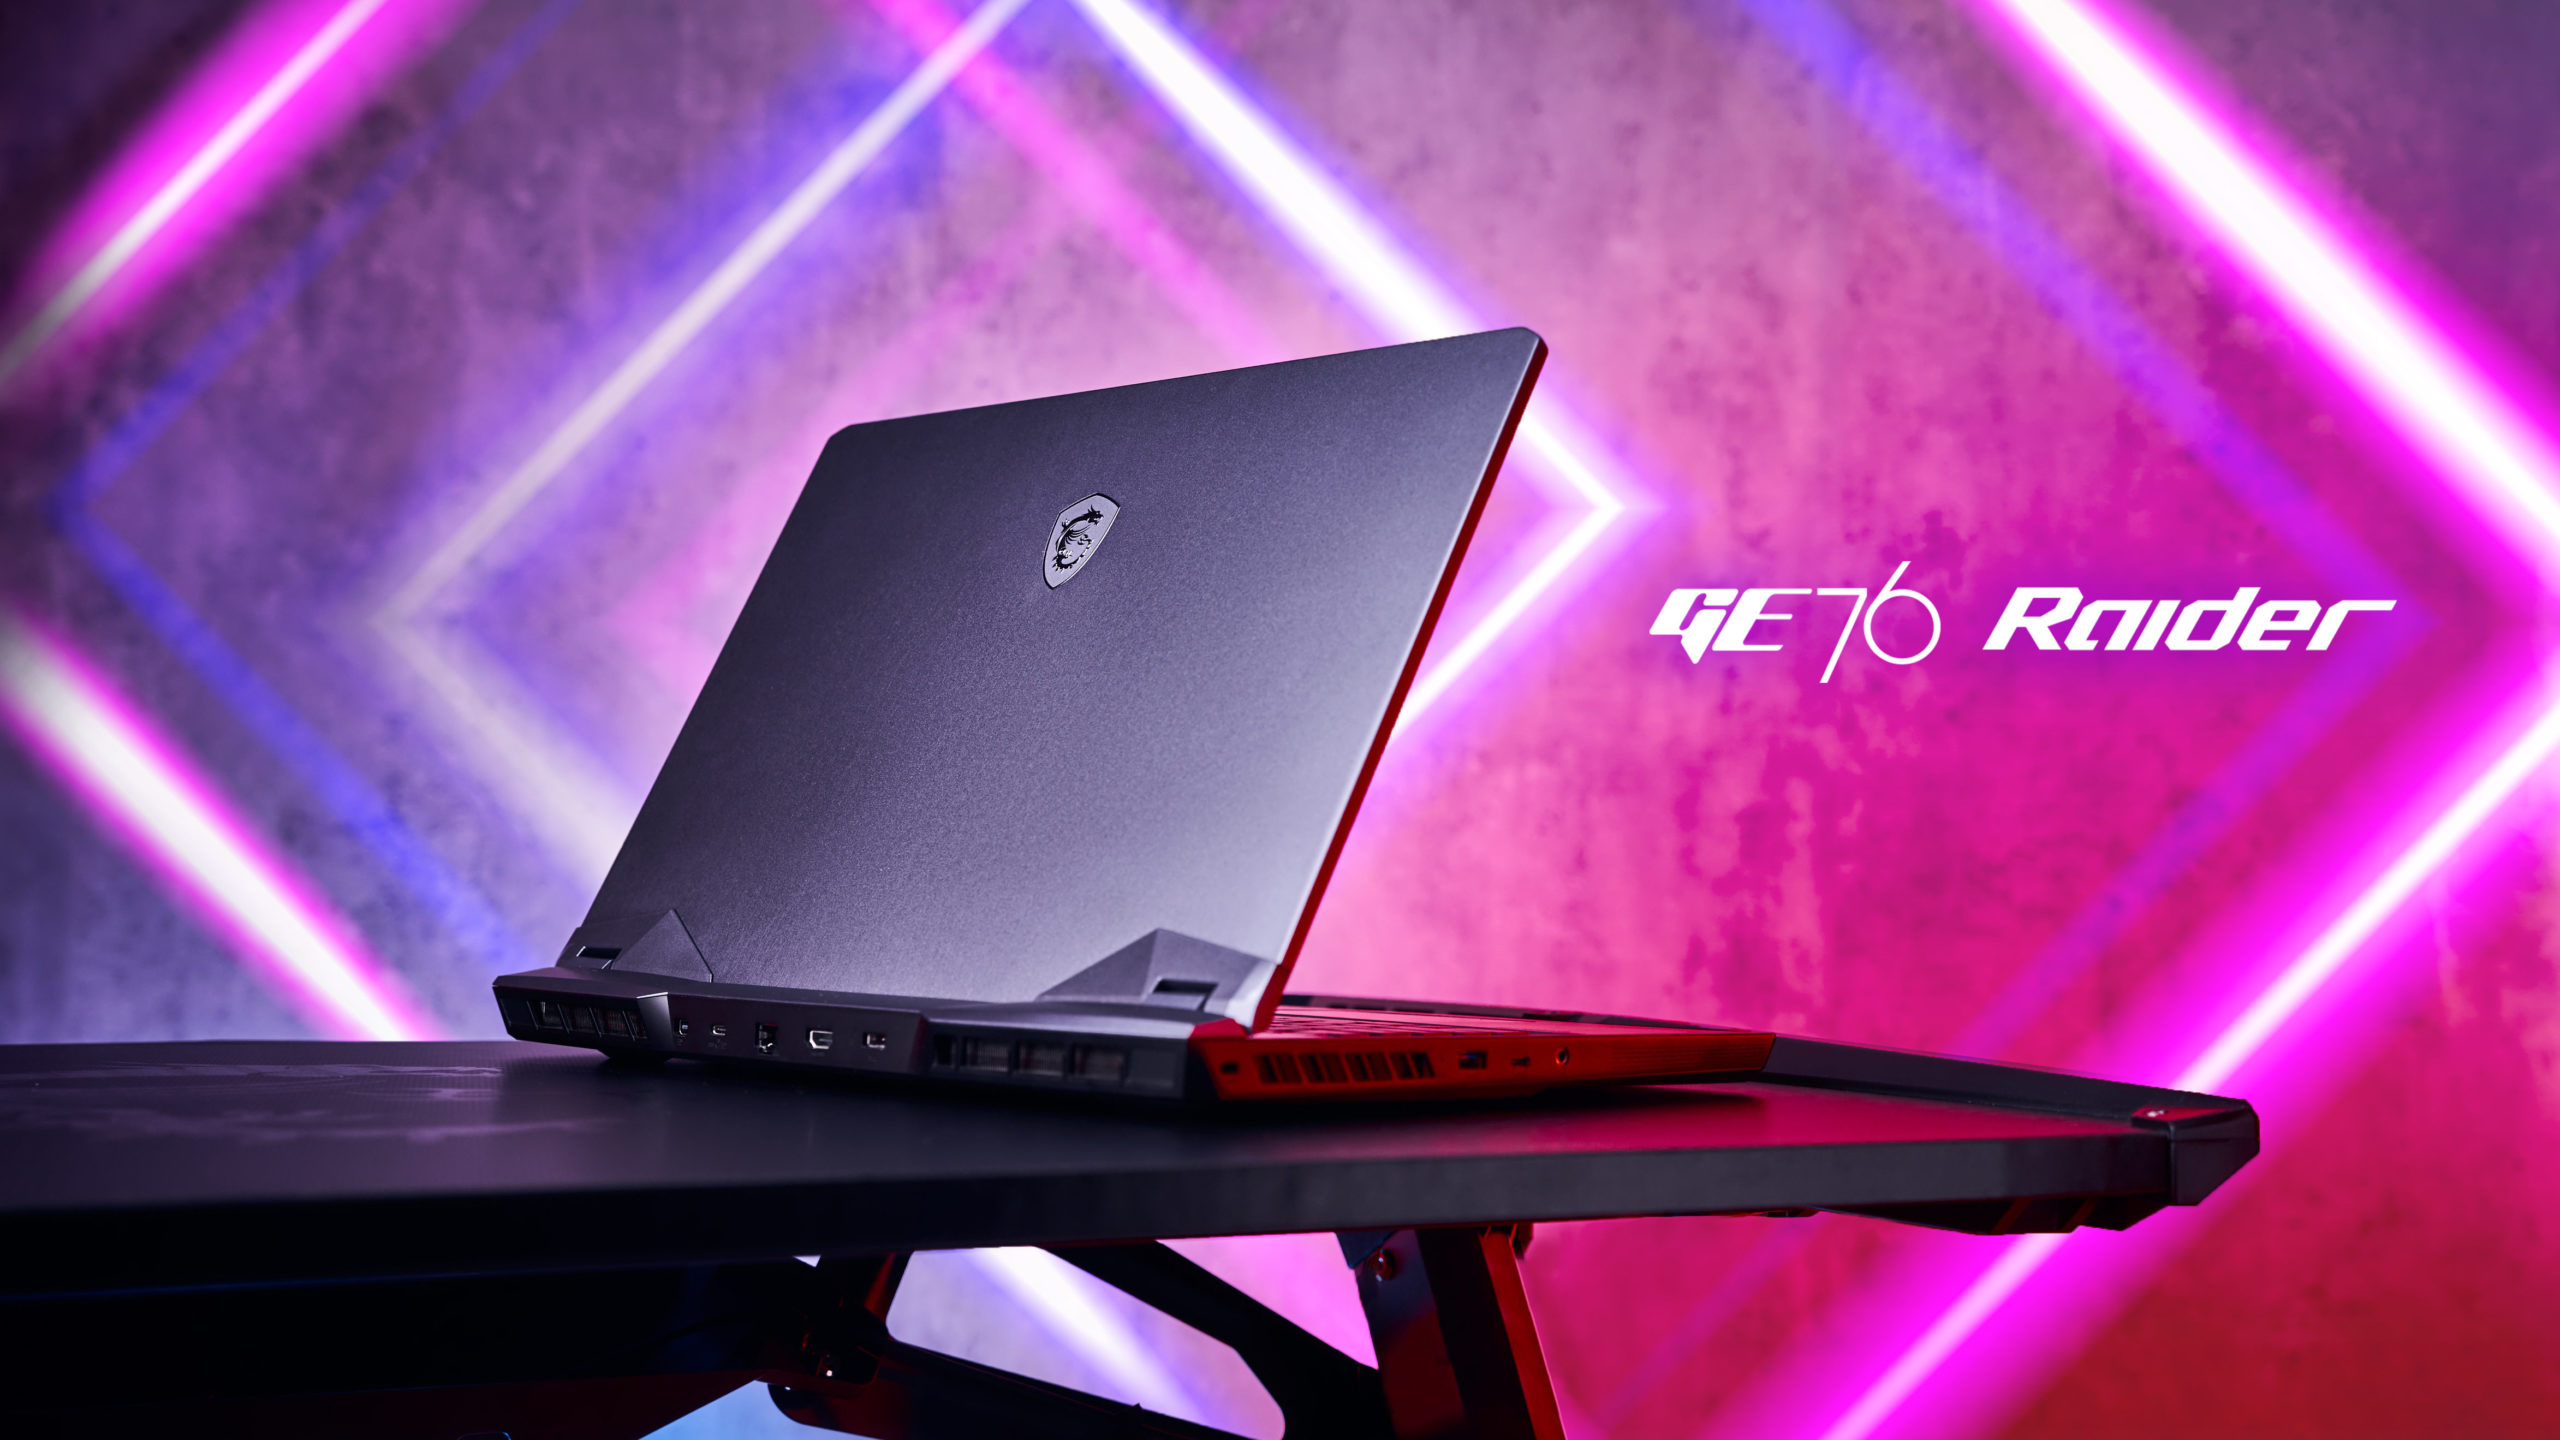 If you're less focused on thinness and want an even more powerful gaming laptop, MSI's updated GE 76 Raider is available in both 15 and 17-inch models with up to an RTX 3080 GPU.  (Image: MSI)